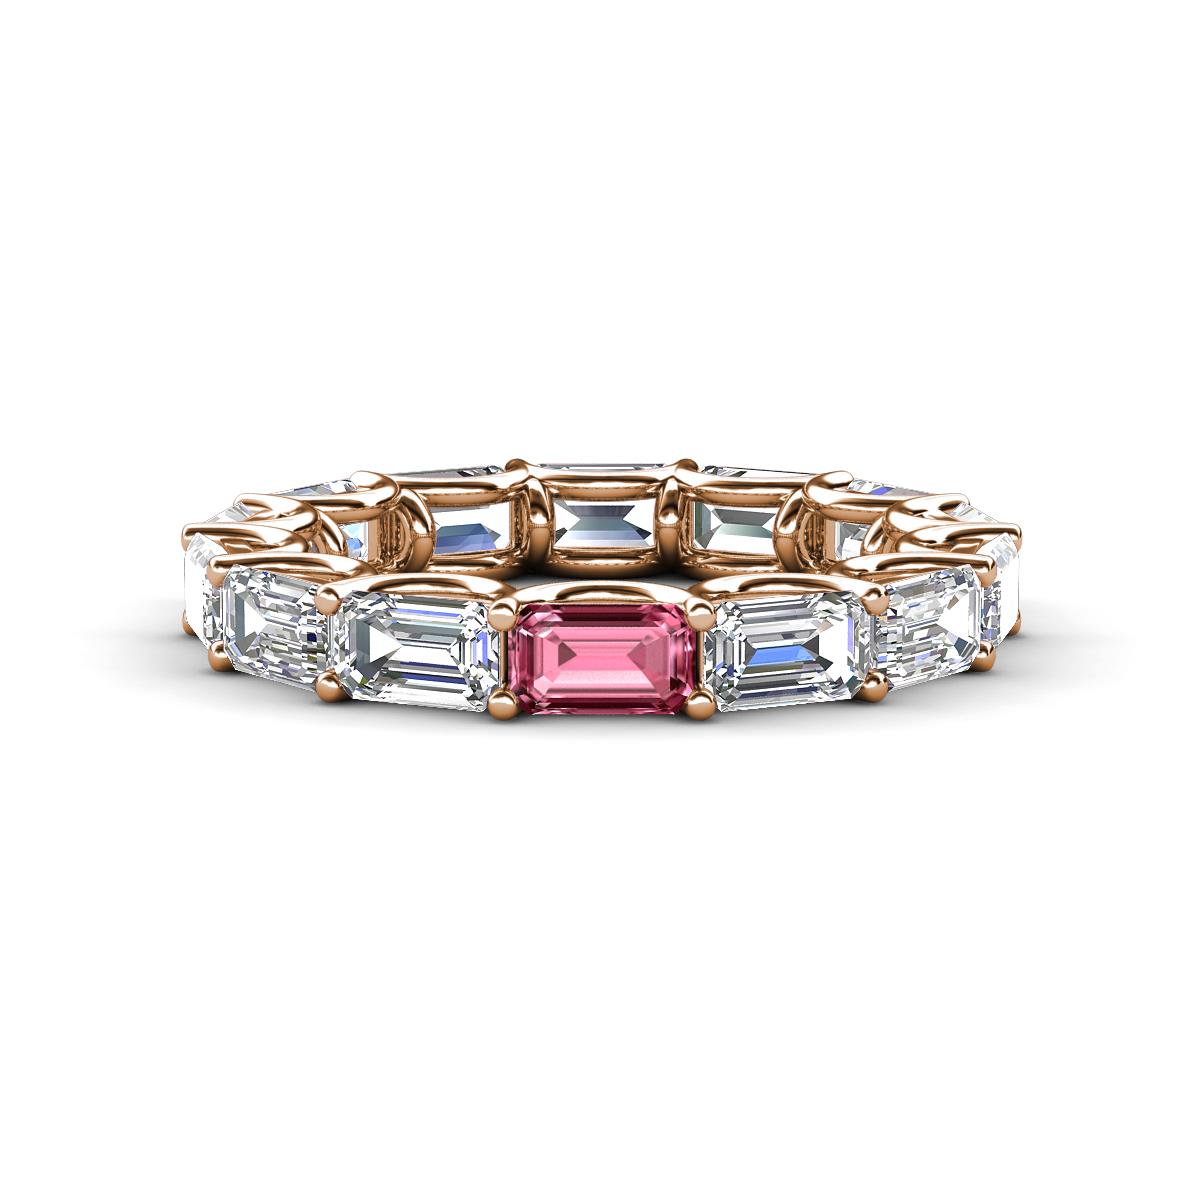 Beverly 5x3 mm Emerald Cut Forever Brilliant Moissanite and Pink Tourmaline Eternity Band 